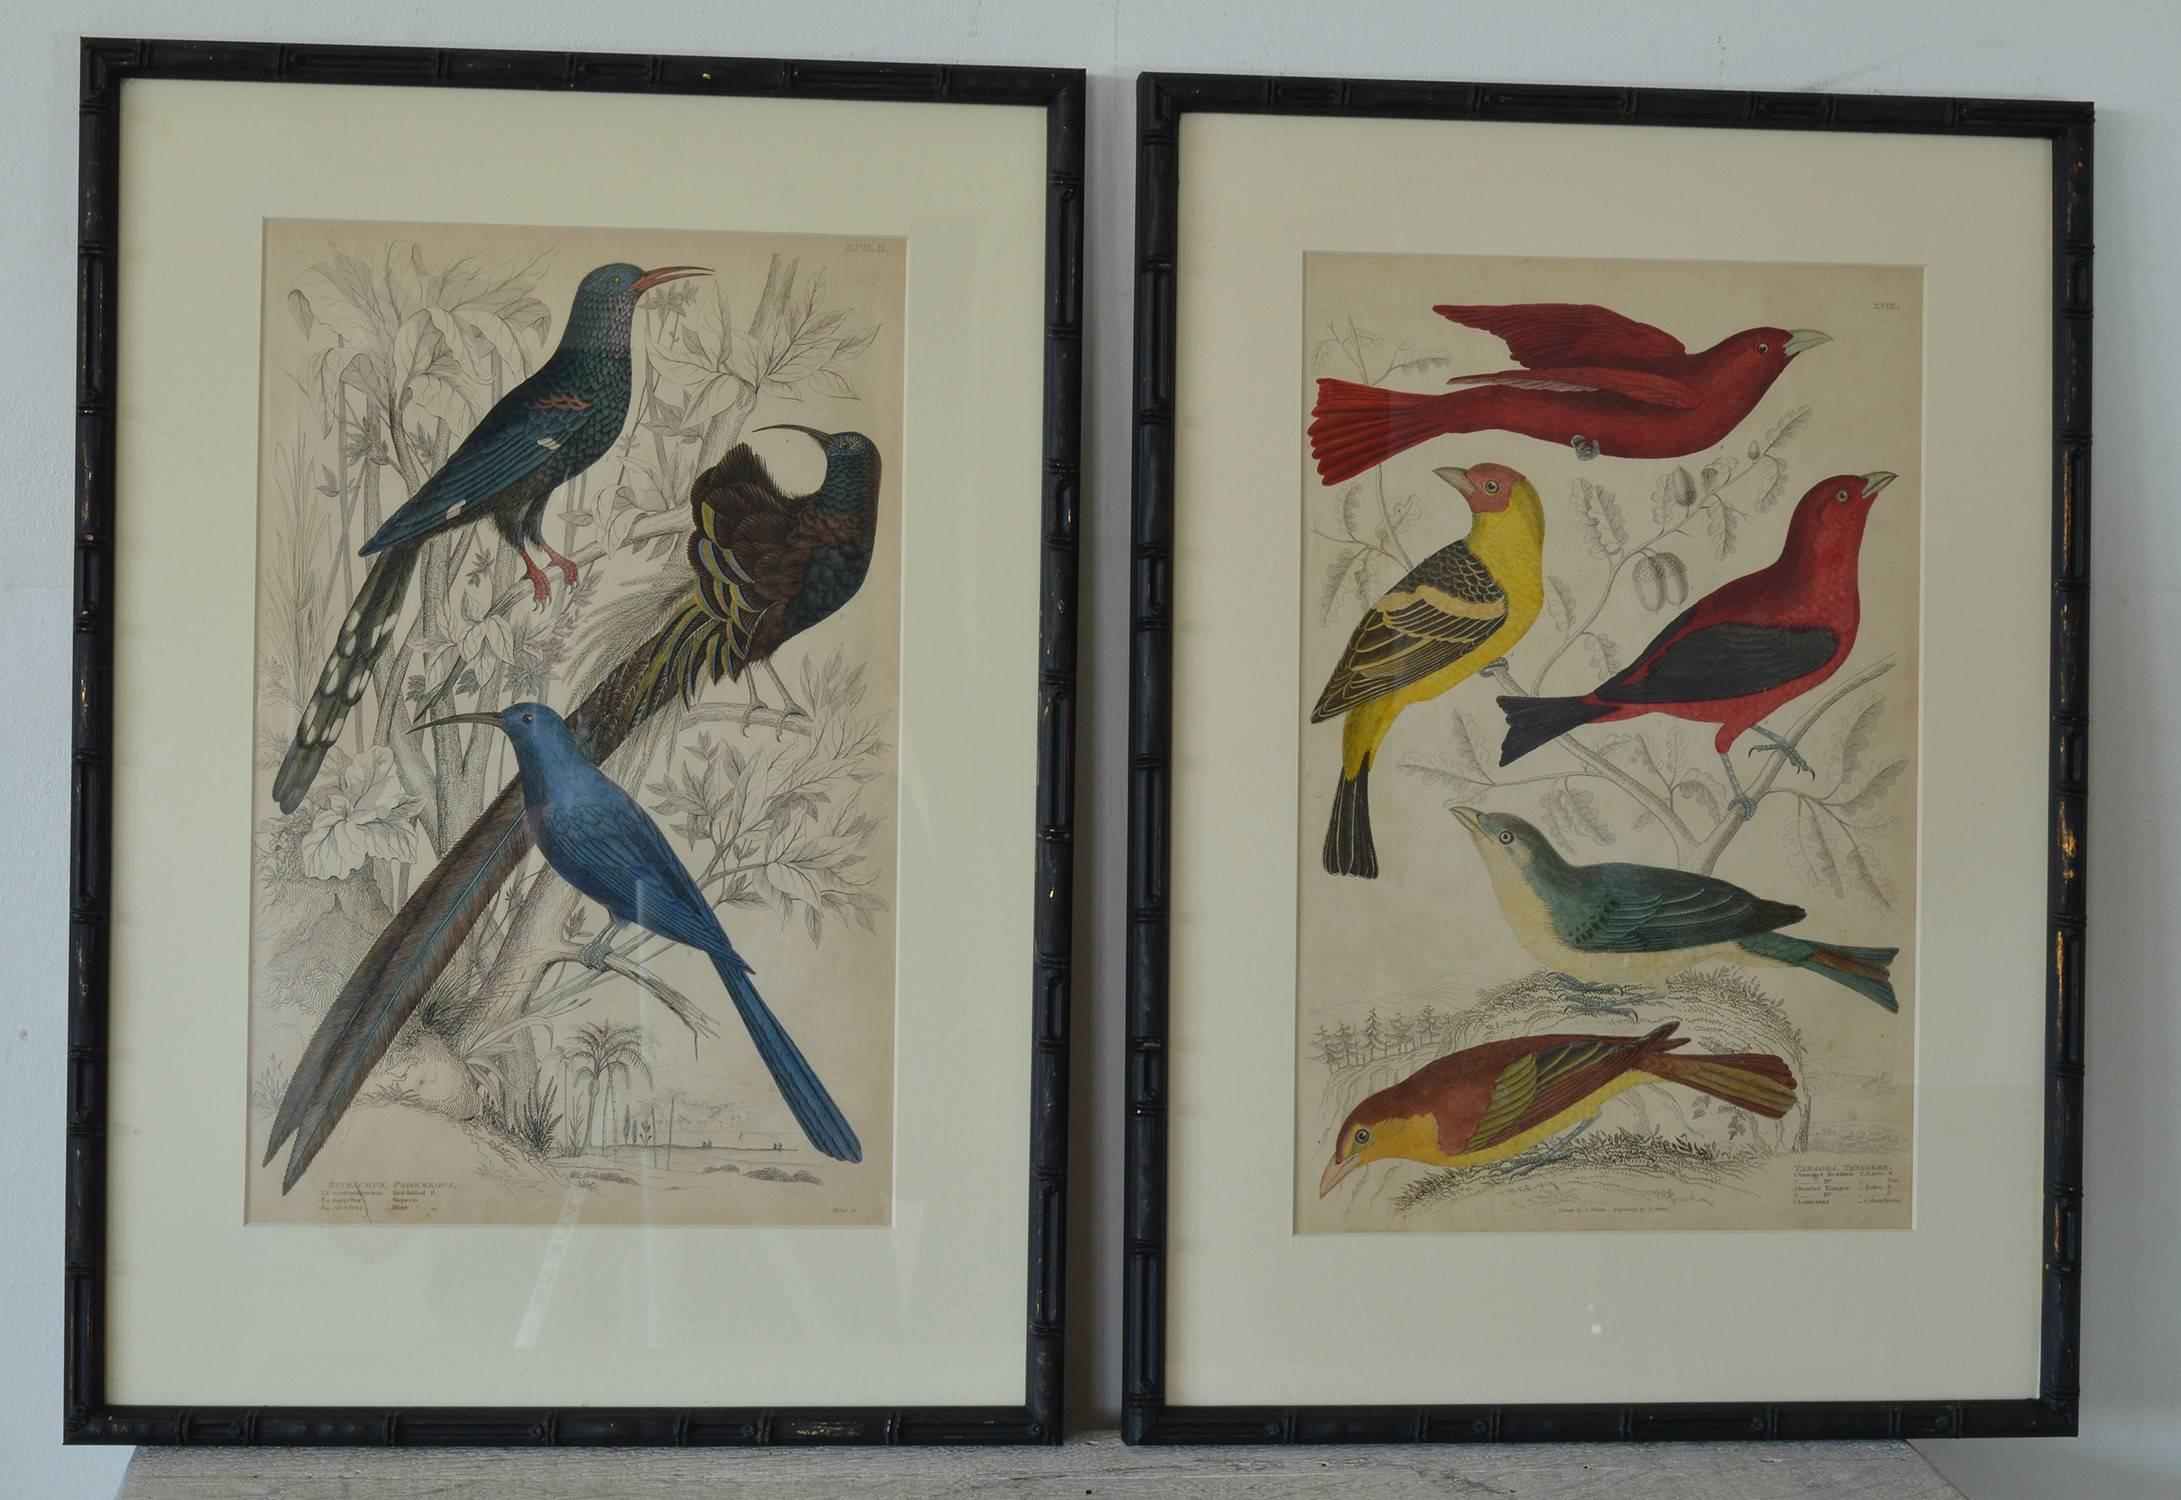 Wonderful set of nine antique bird prints in exquisite bright original colors.

Presented in our own custom made ebonized faux bamboo frames.

Lithographs after the original drawings by Captain Brown. Original hand color.

Published